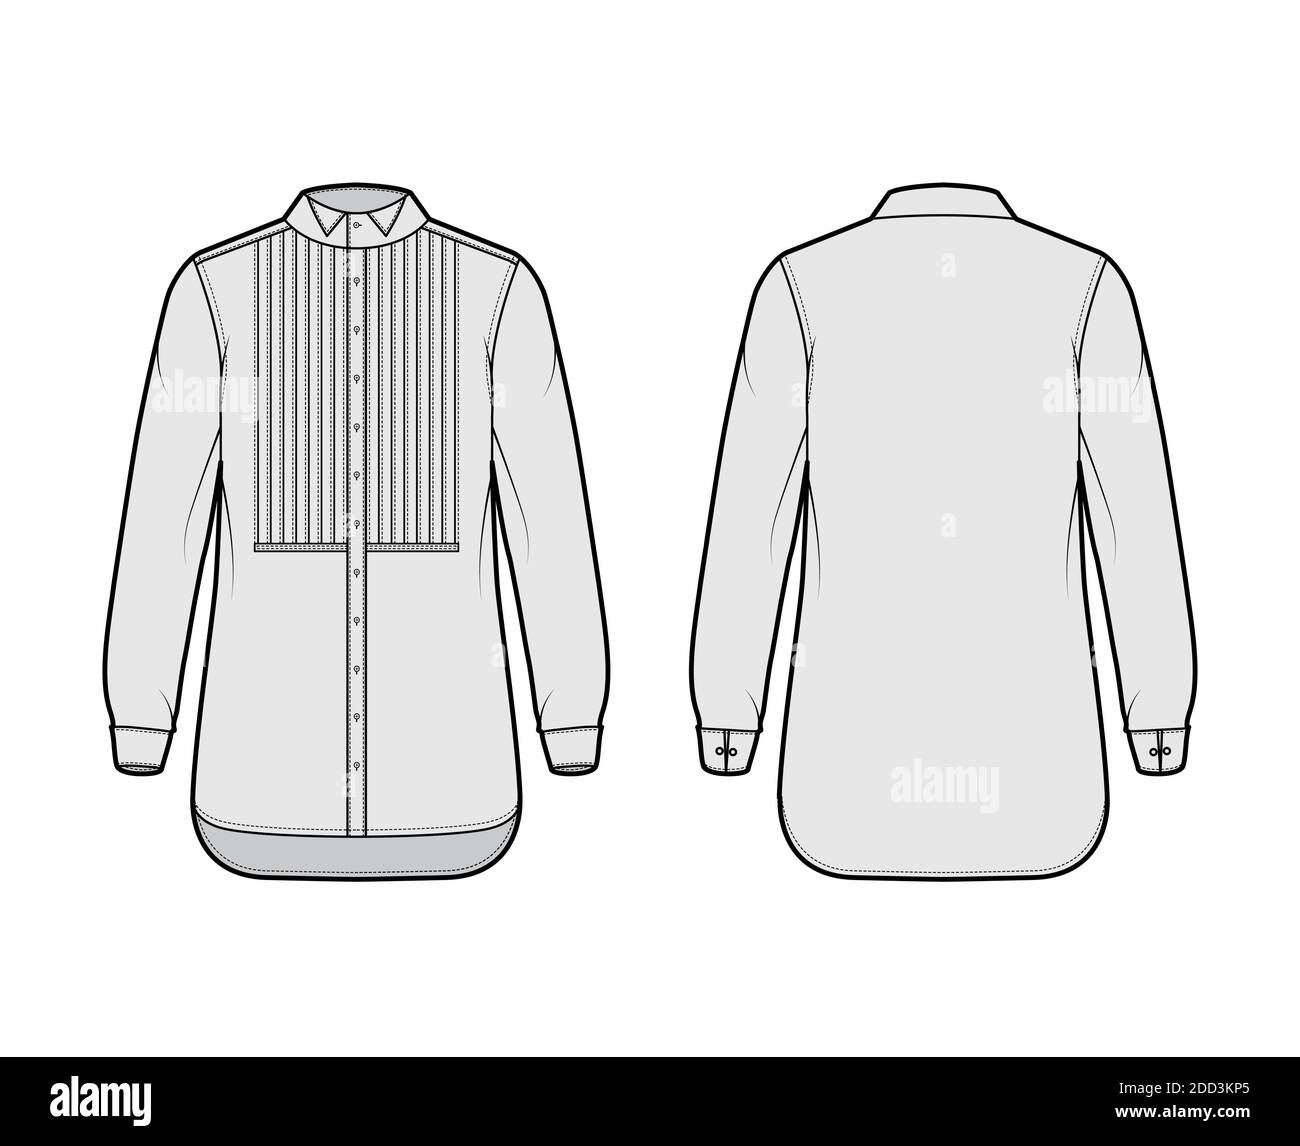 Shirt tuxedo dress technical fashion illustration with pleated pintucked bib, long sleeve with french cuff, wing collar, relax fit. Flat template front back grey color. Women men unisex top CAD mockup Stock Vector